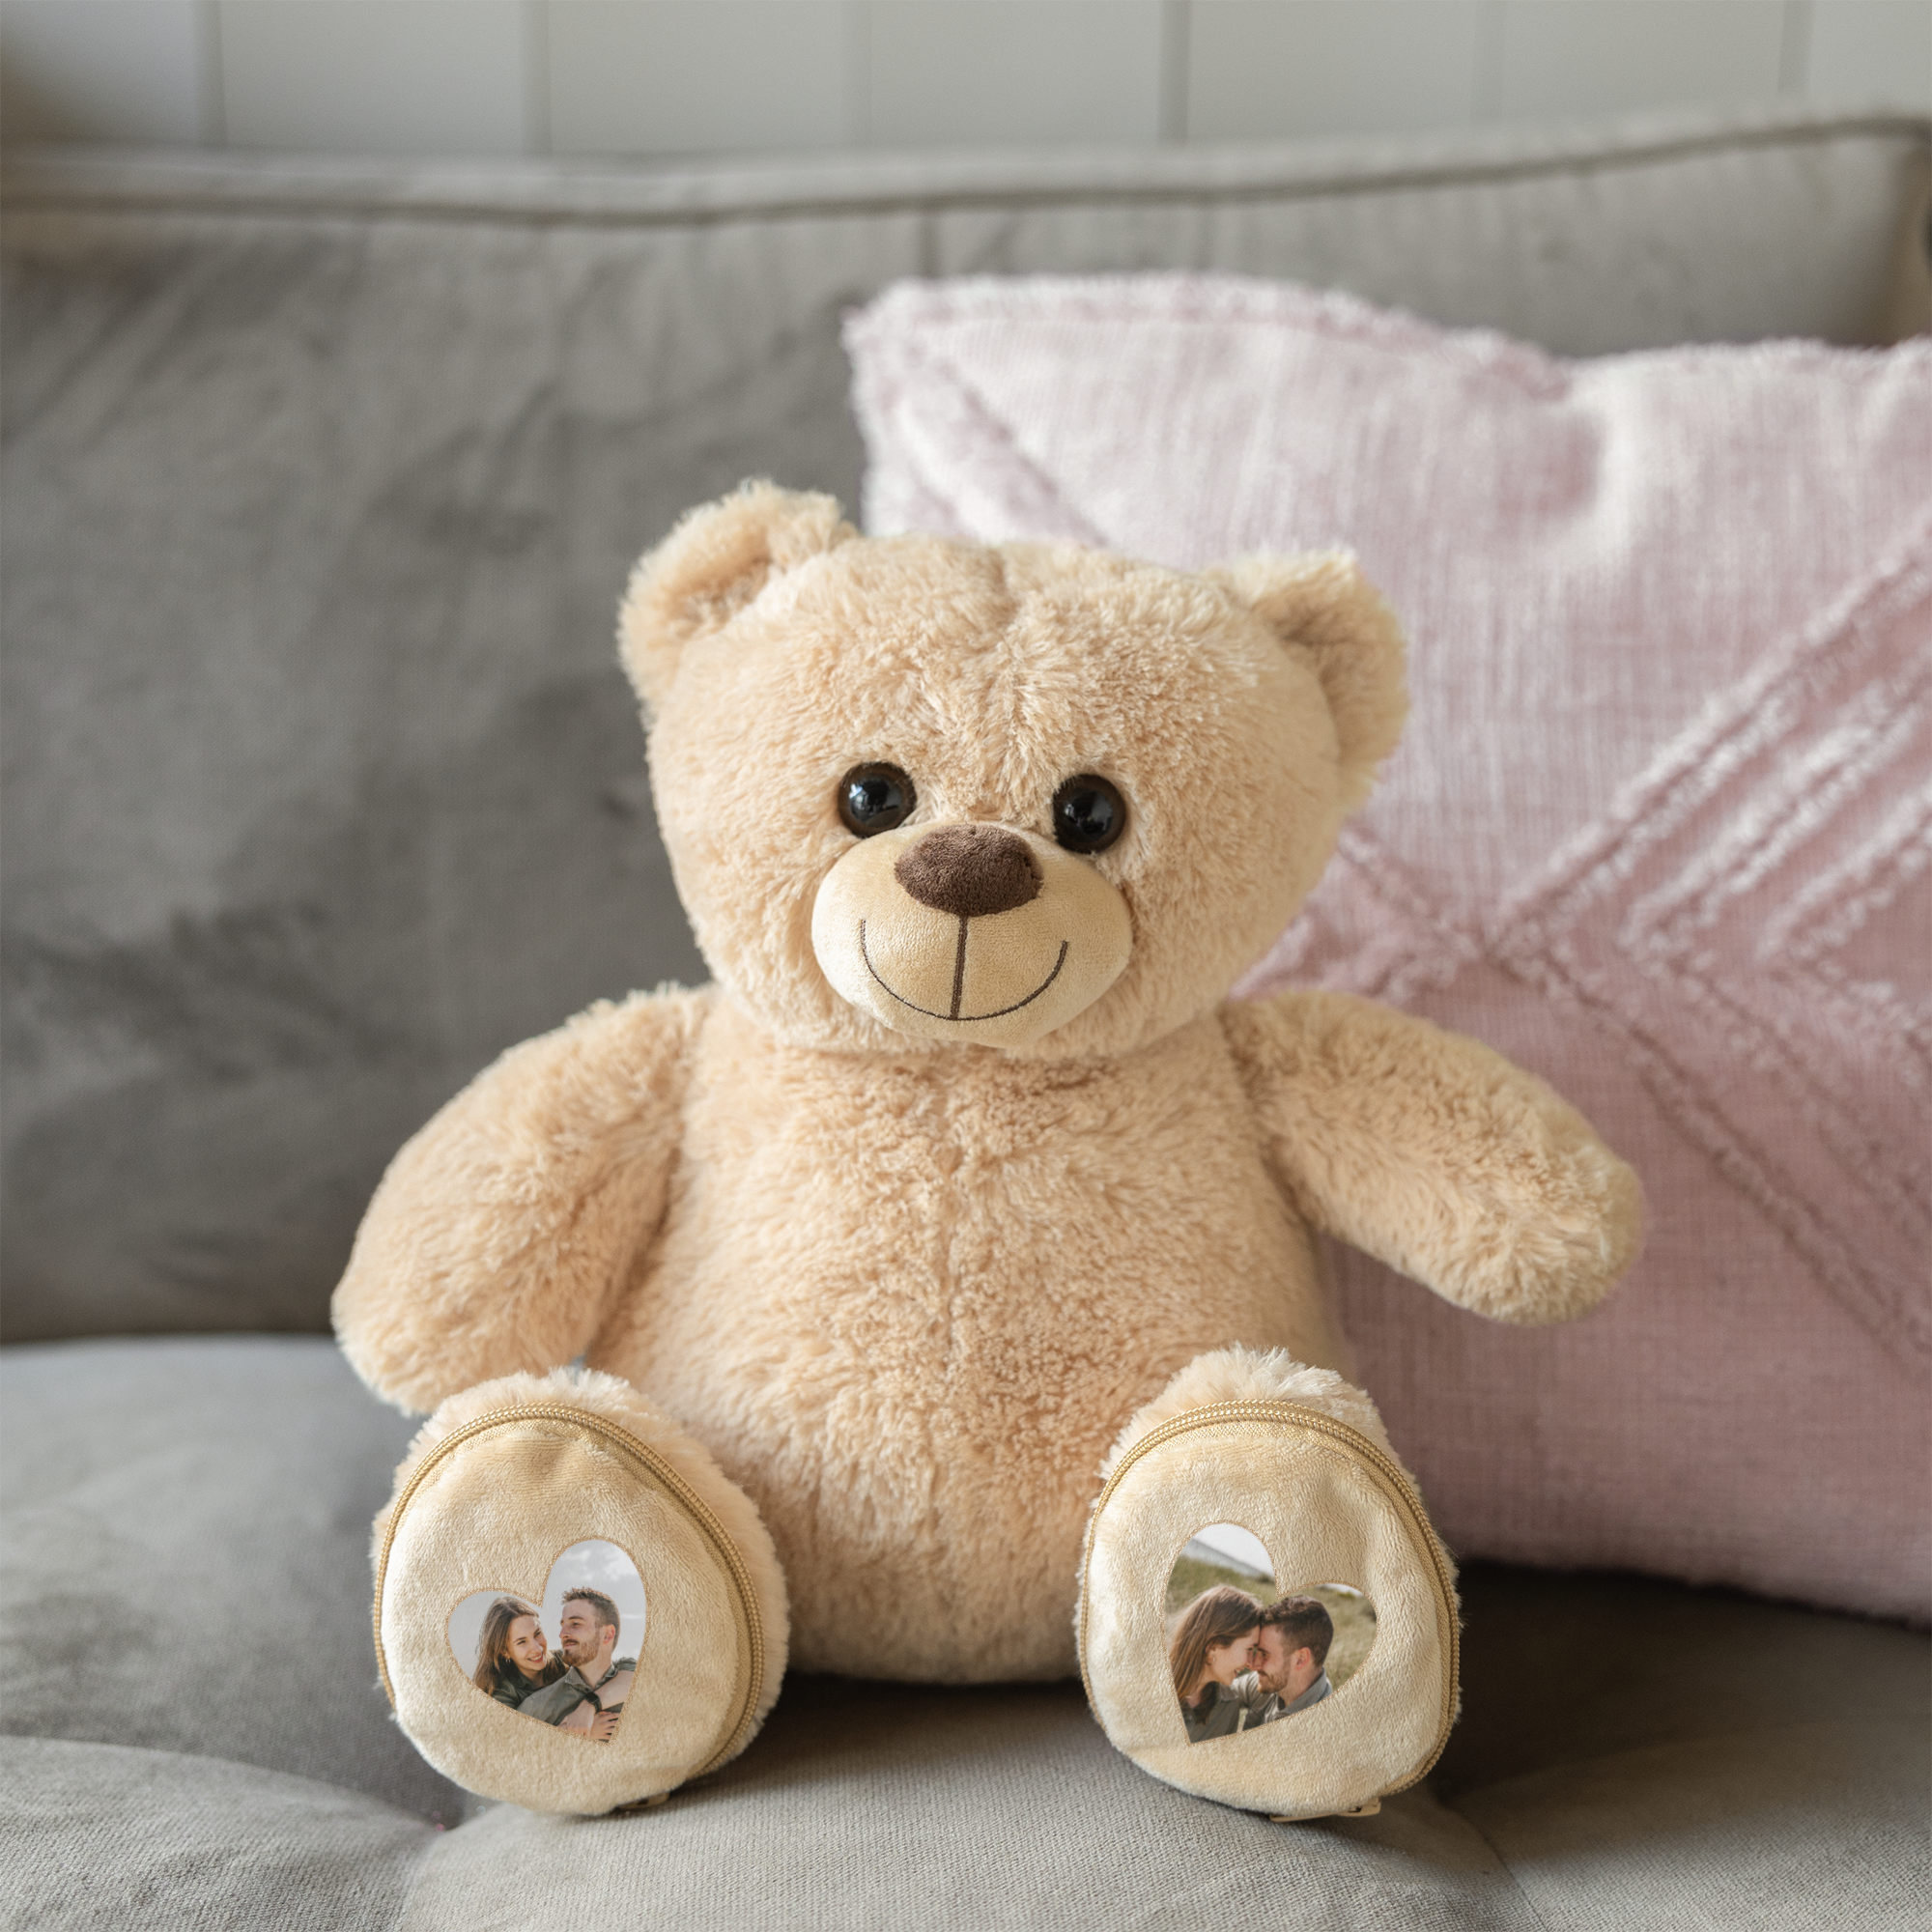 Personalised teddy bear with feet pockets